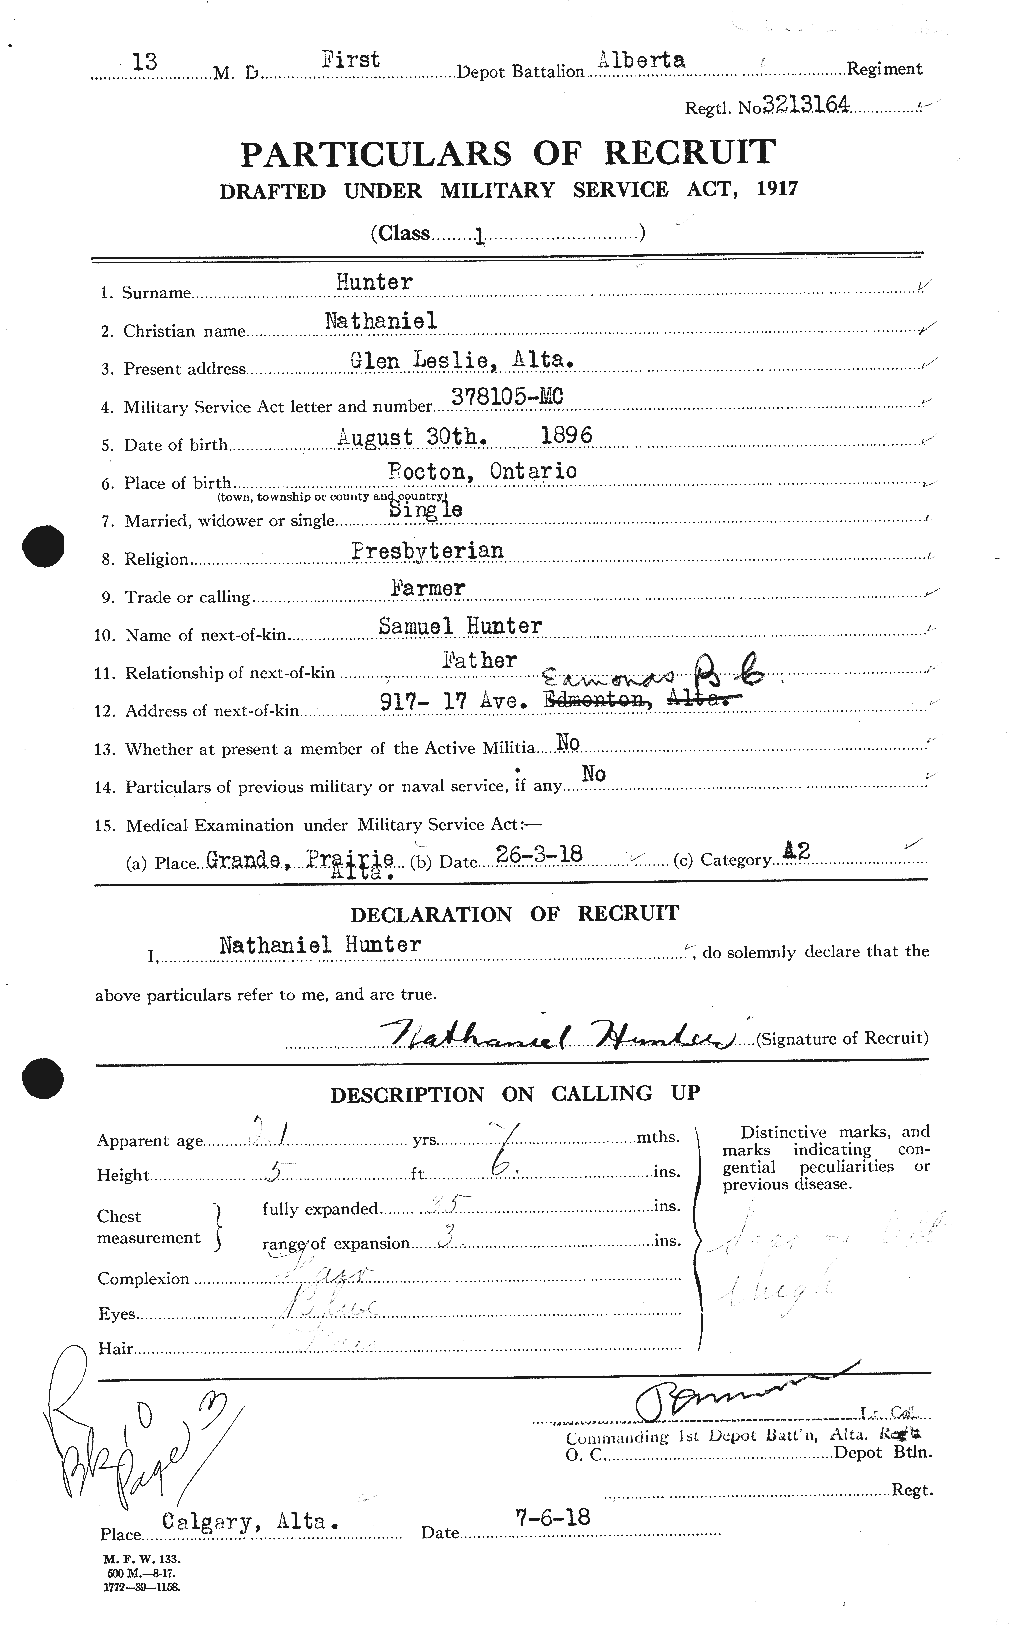 Personnel Records of the First World War - CEF 406422a